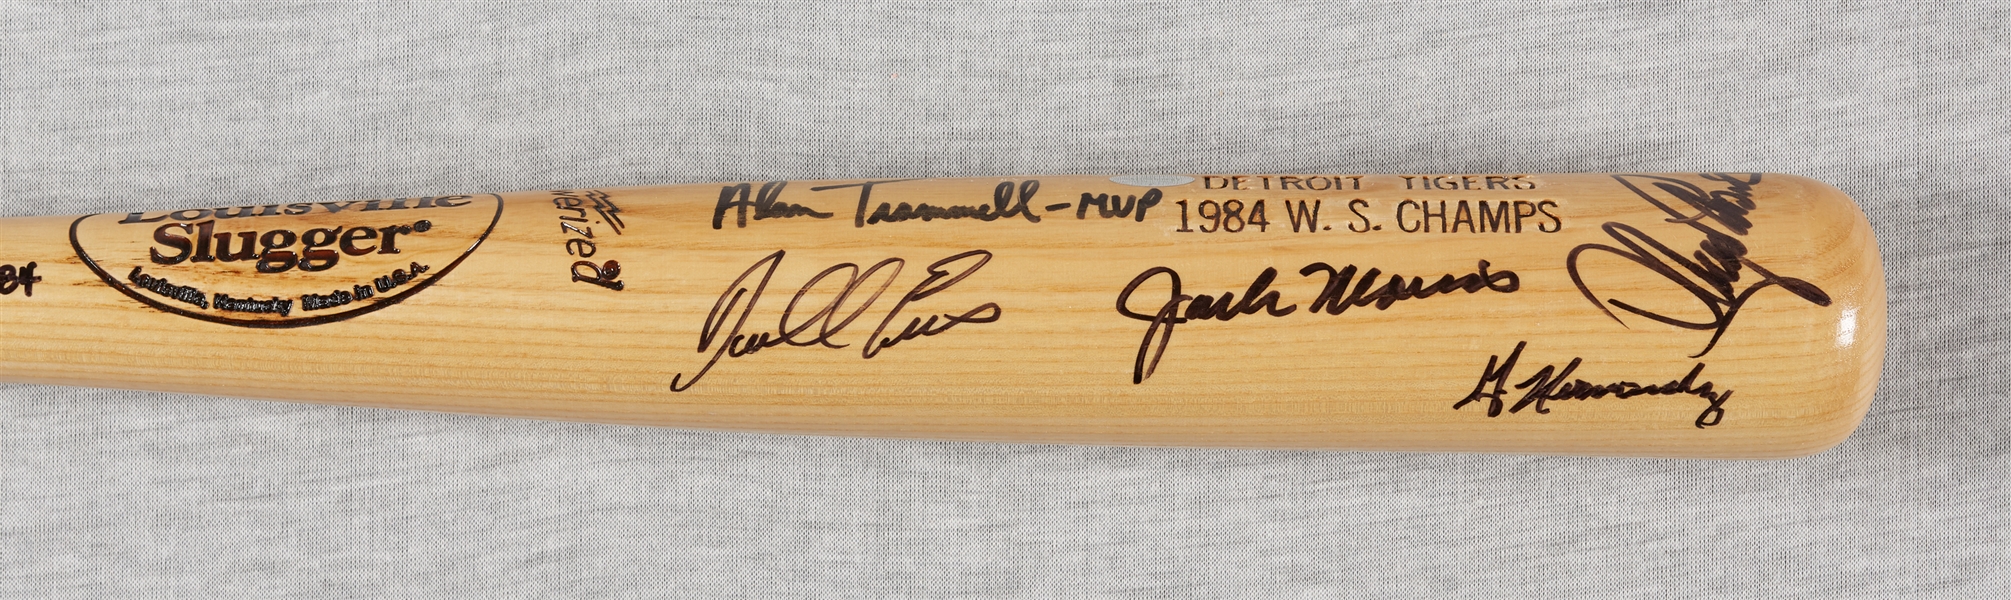 1984 Detroit Tigers World Champs Team-Signed Bat (7) (Mounted Memories)